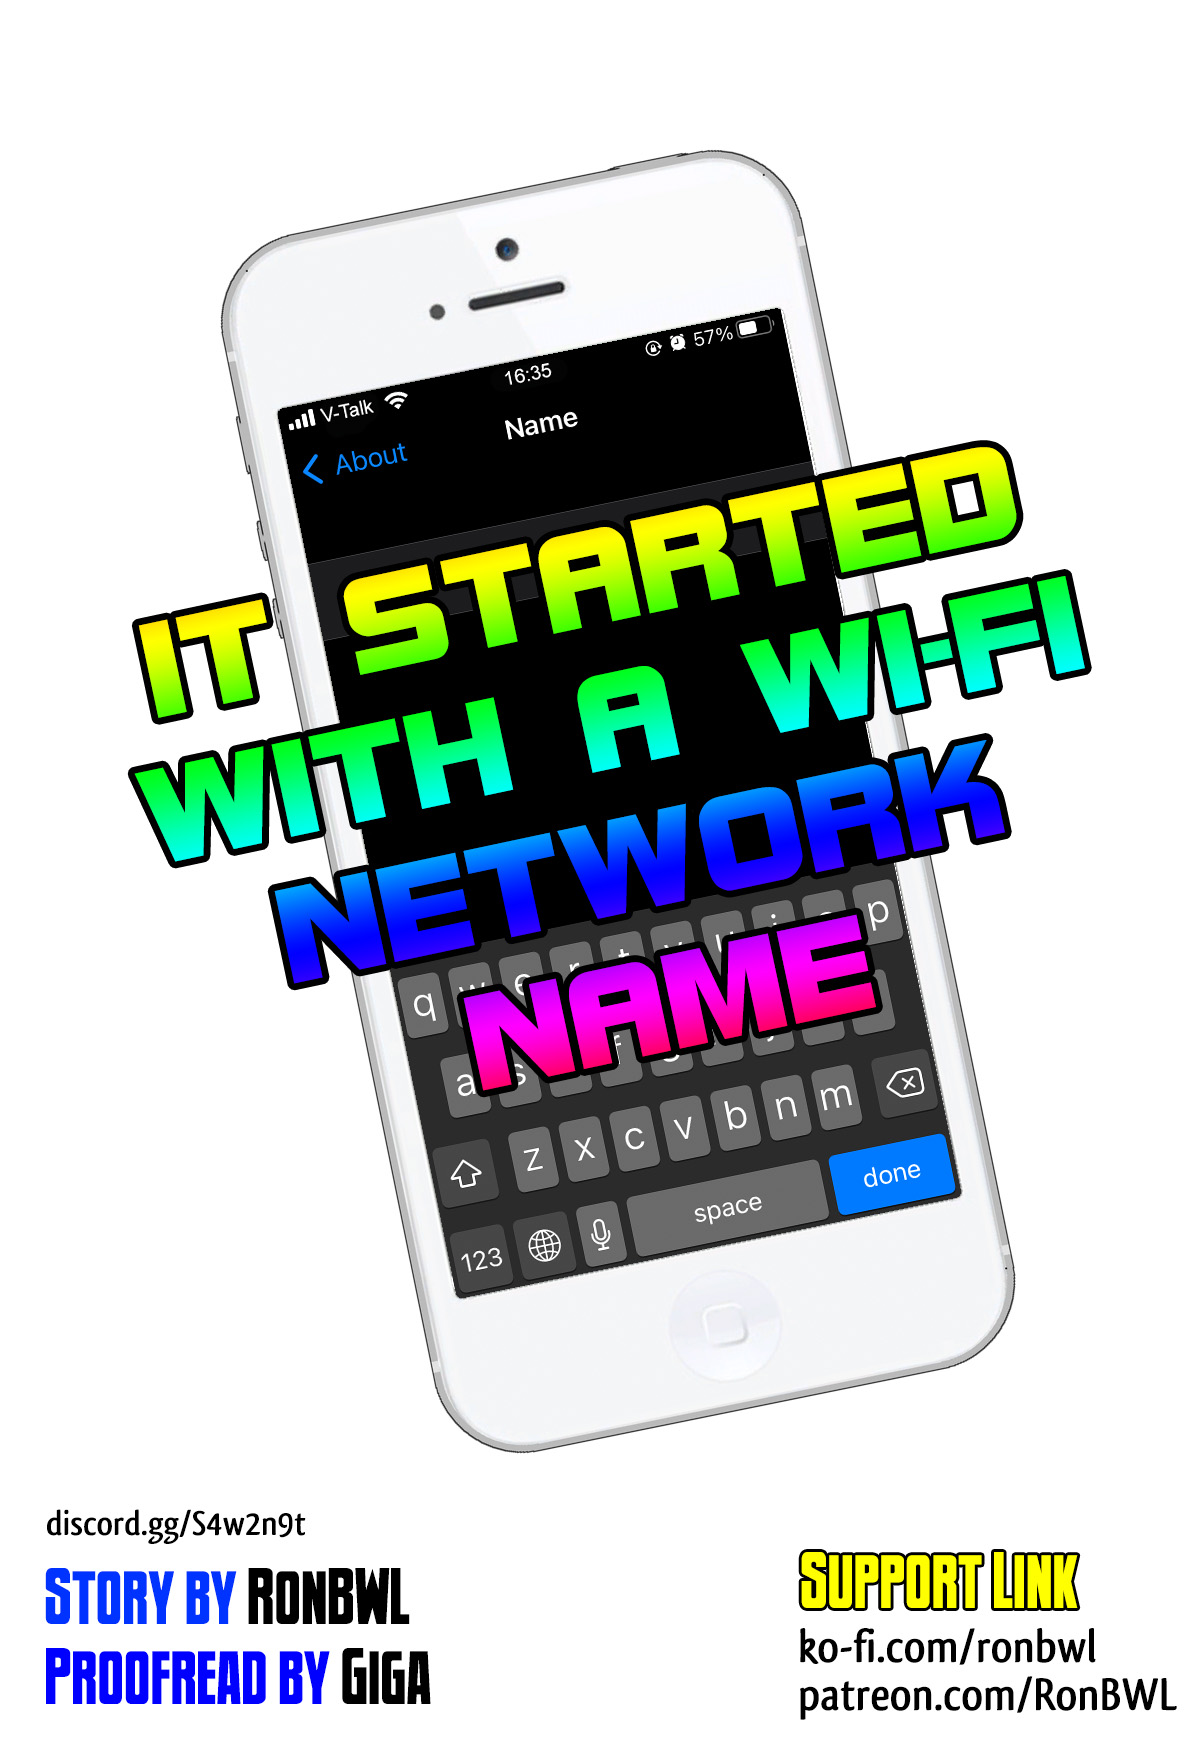 It started with a Wi-Fi network name 7